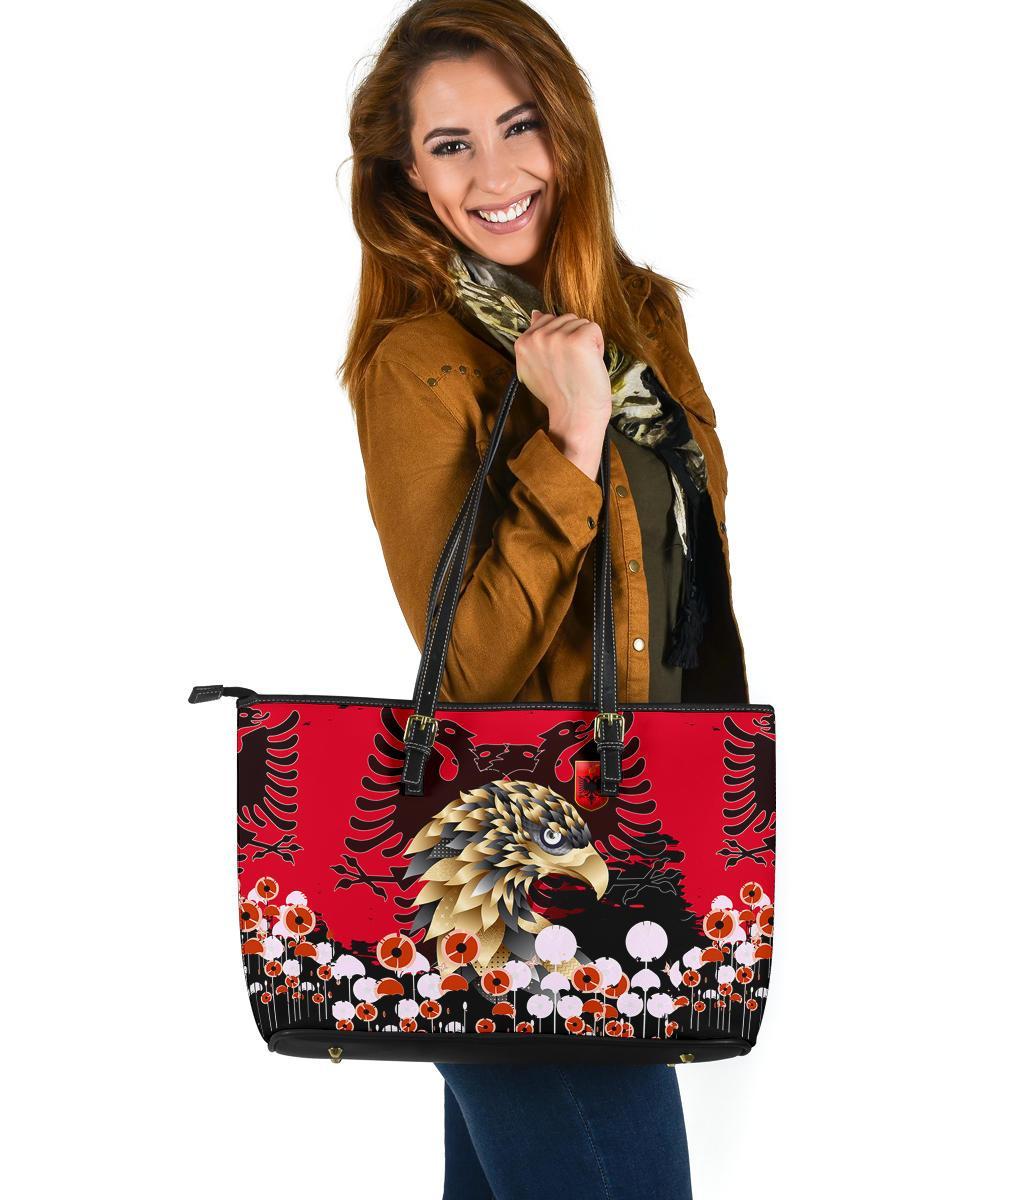 albania-golden-eagle-large-leather-tote-bag-happy-flag-day